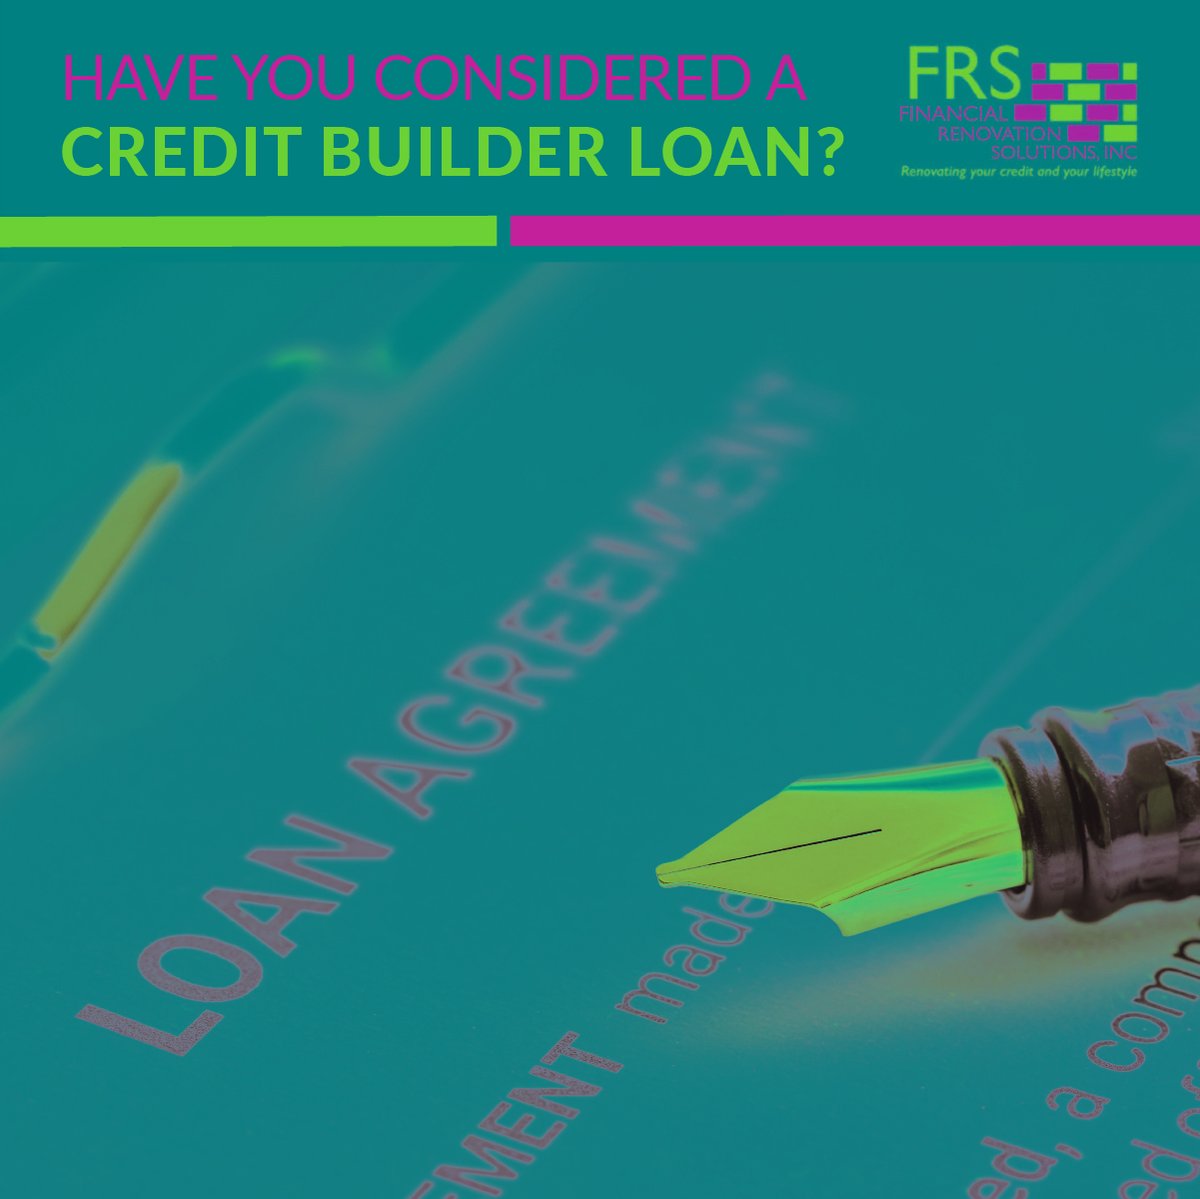 Improving your credit is hard. Improving your credit from scratch is seemingly impossible. A credit builder loan can help accelerate the process. Here's how a credit builder loan can help you reach your credit goals. bit.ly/2yFAuvo

#CreditRepair #CreditBuilderLoan